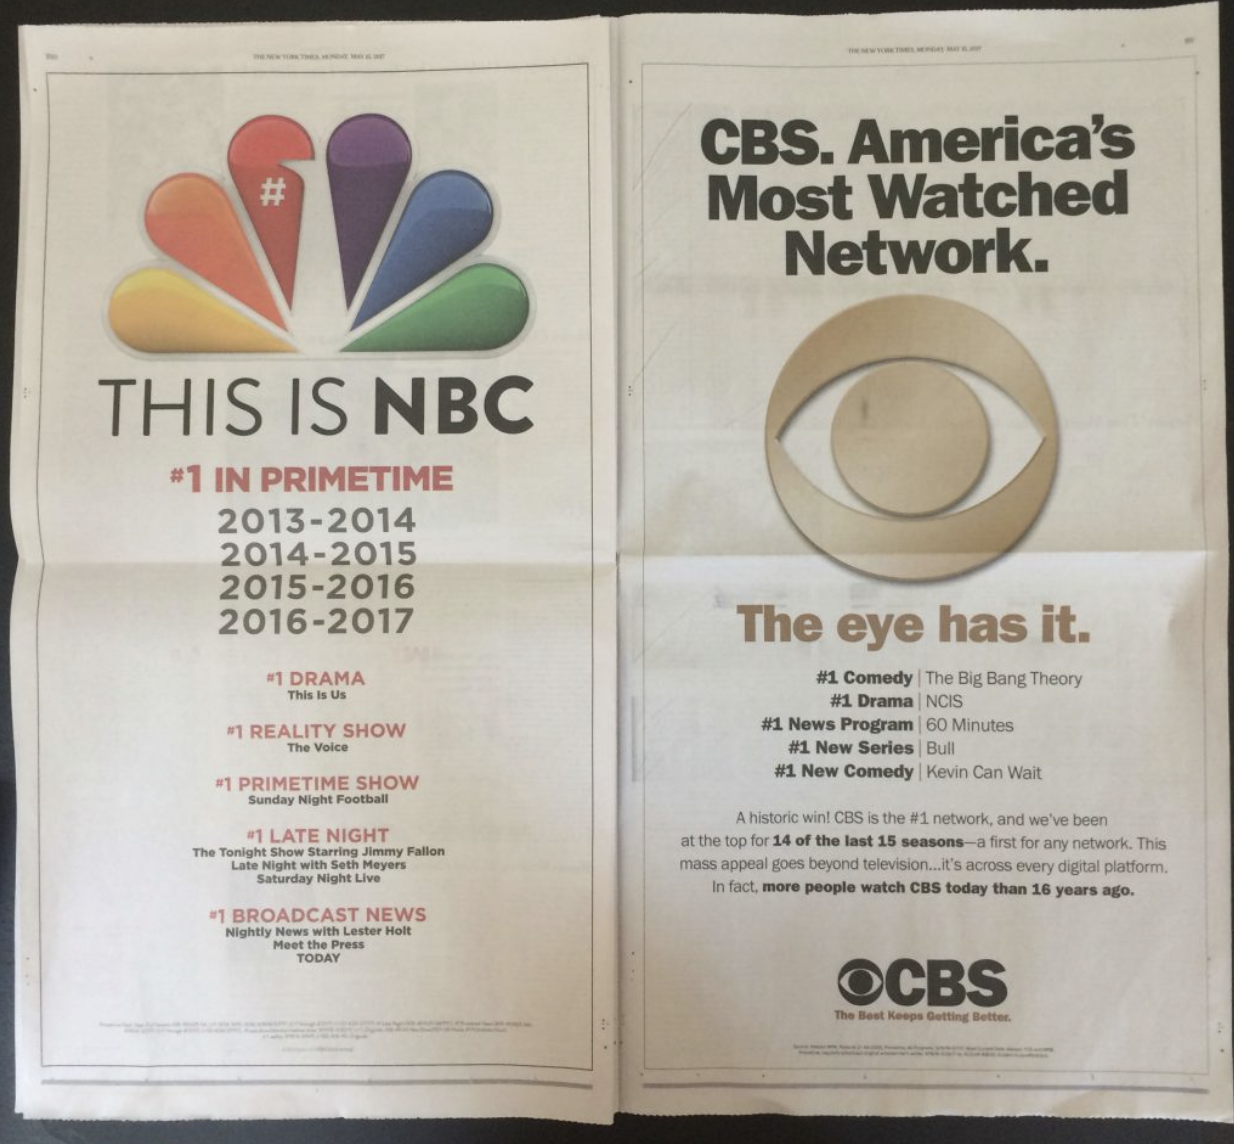 flyer - This Is Nbc 1 In Primetime 20132014 Cbs. America's Most Watched Network. 20142015 20152016 20162017 Drama This 1 Reality Show The 1 Primetime Show Late Night The Tonight Show Starring my Fa 1 Broadcast News Highly News with Lester Today The eye ha